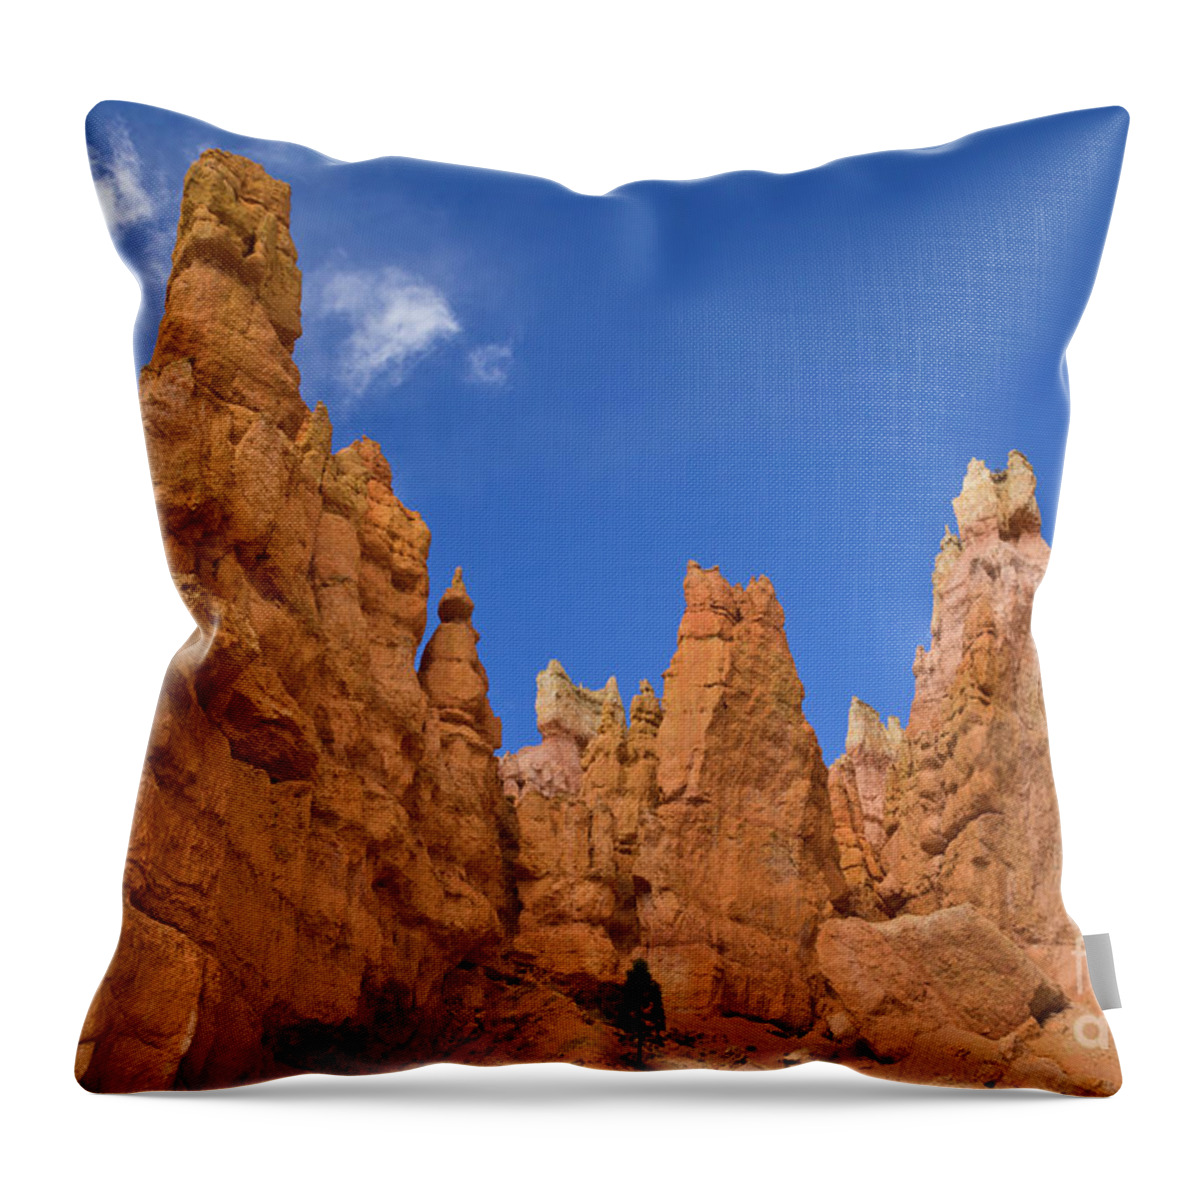 00559157 Throw Pillow featuring the photograph Bryce Canyon Hoodoos by Yva Momatiuk John Eastcontt